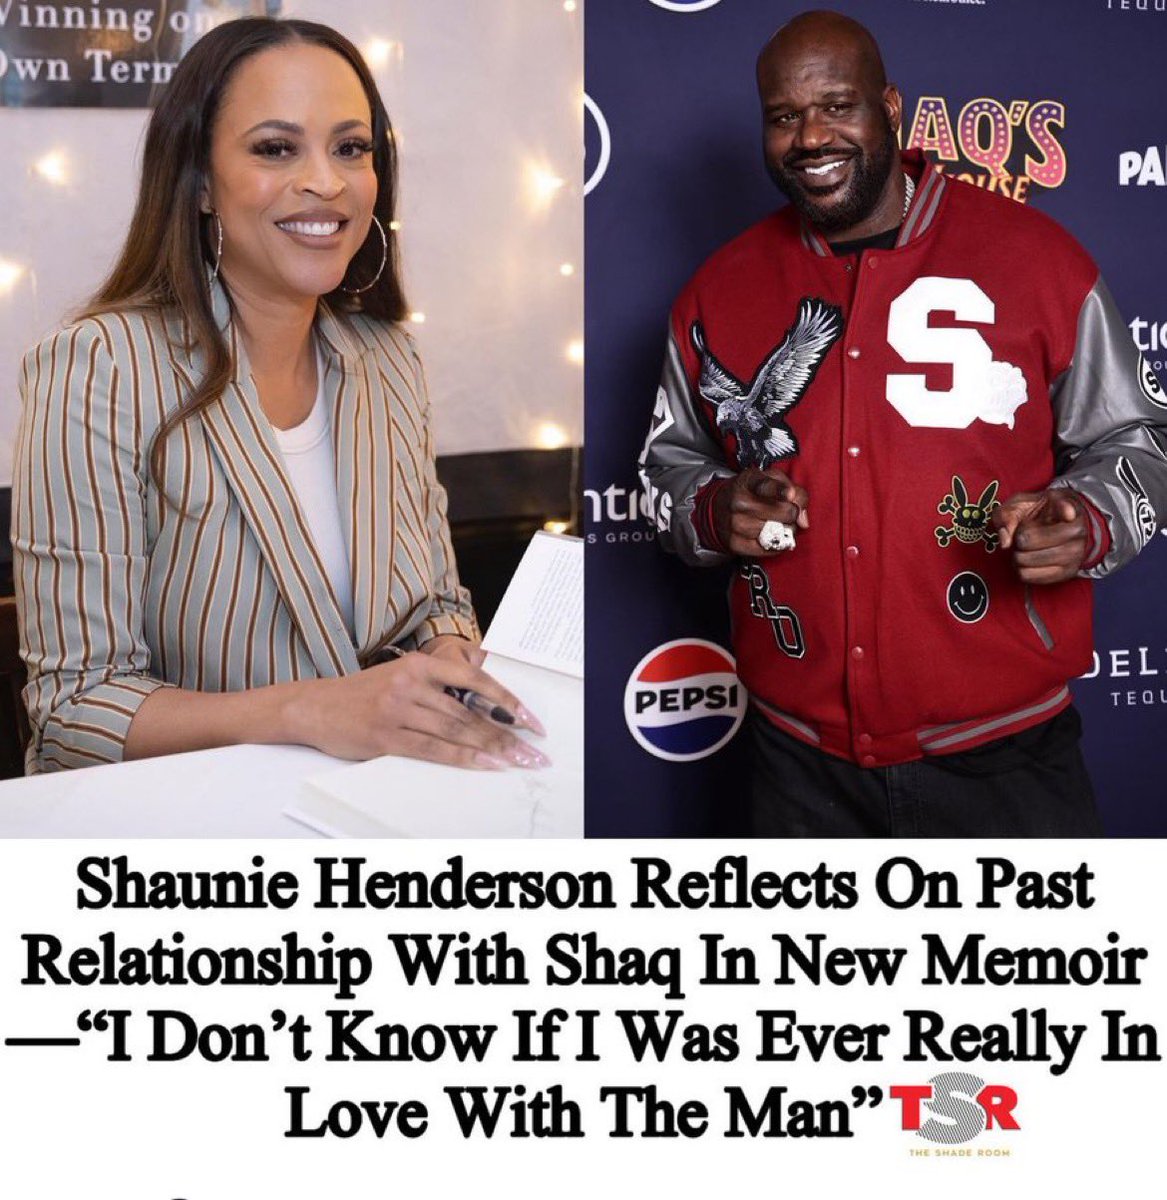 Shaq responds to his ex wife shaunie on ig after she wrote in her book “I don’t know if I was ever really in love with the man”